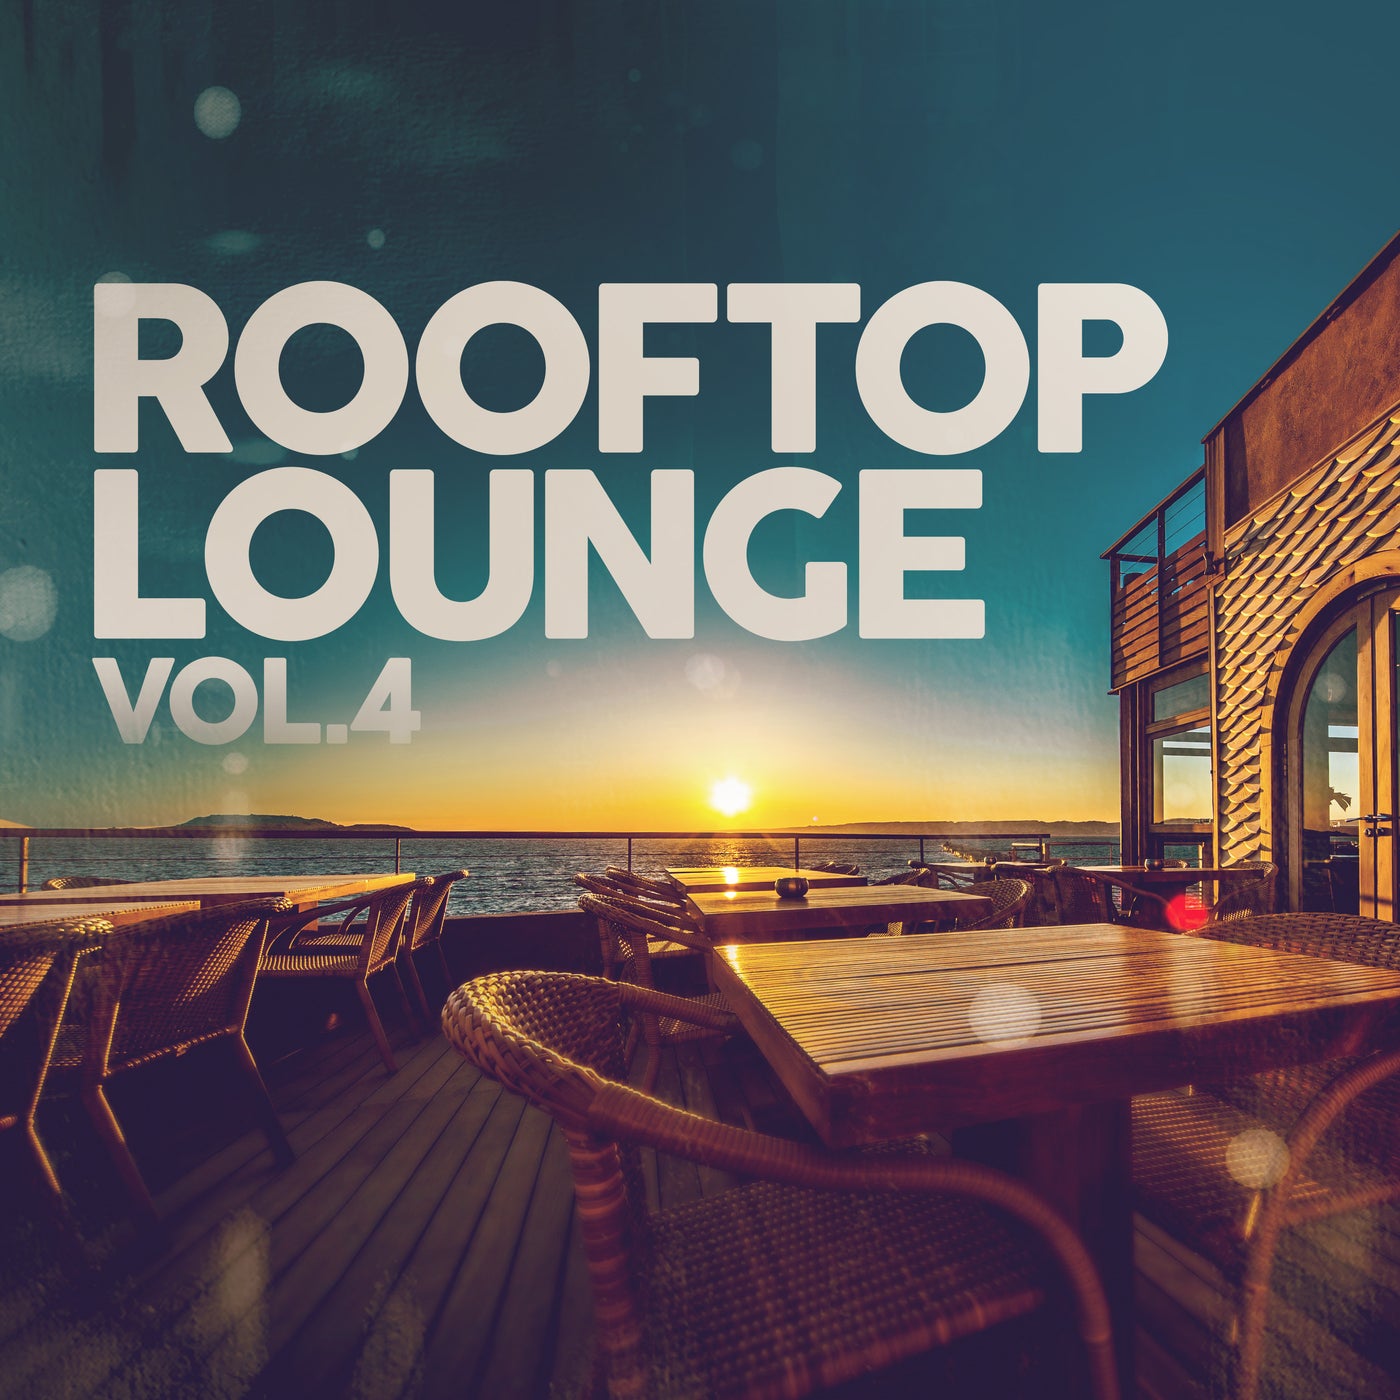 Rooftop Lounge Vol. 4